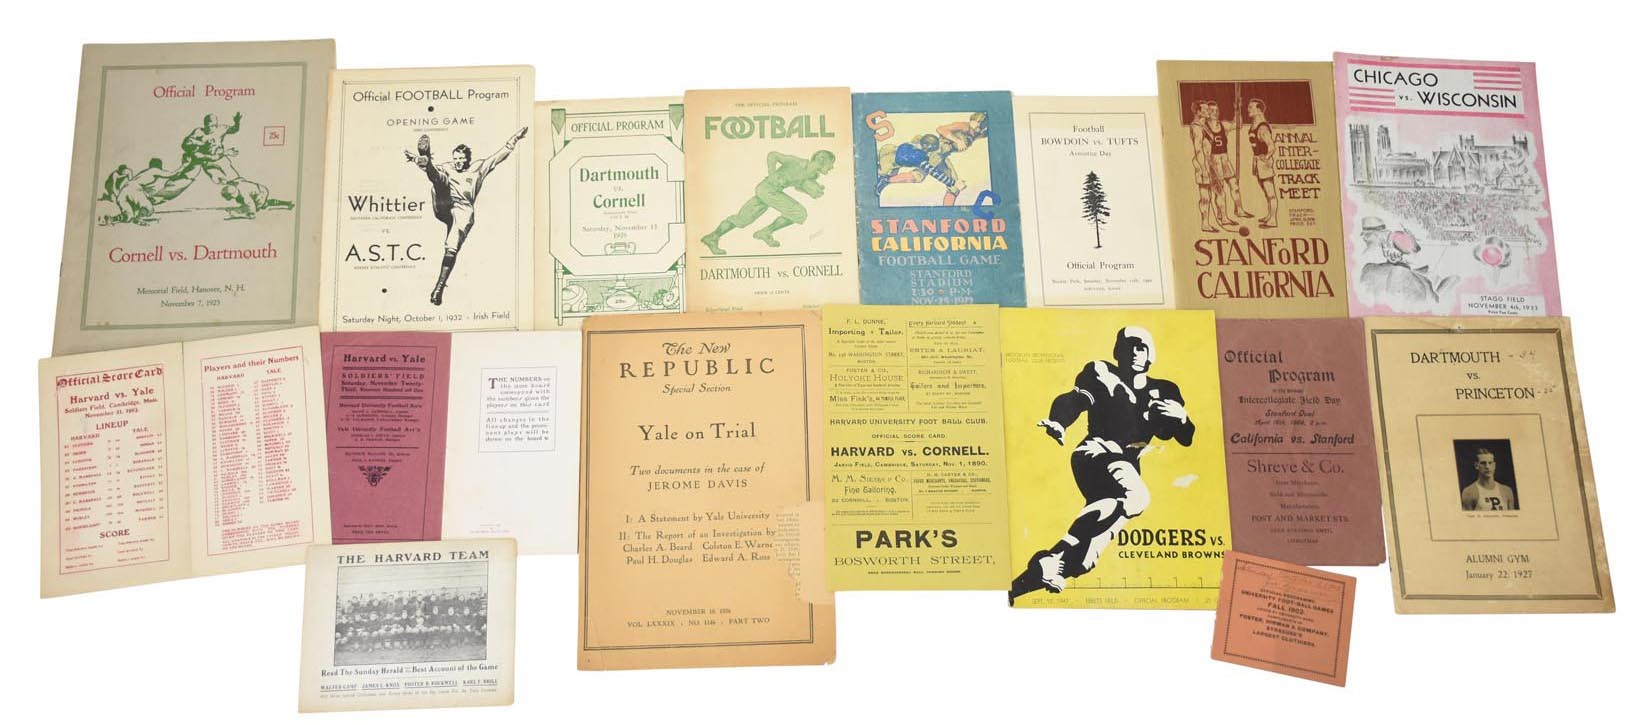 Baseball Autographs - 1890s-2000s Pro & College Sports Program Collection w/Alcindor's 1st UCLA Game - Some Signed (250+)